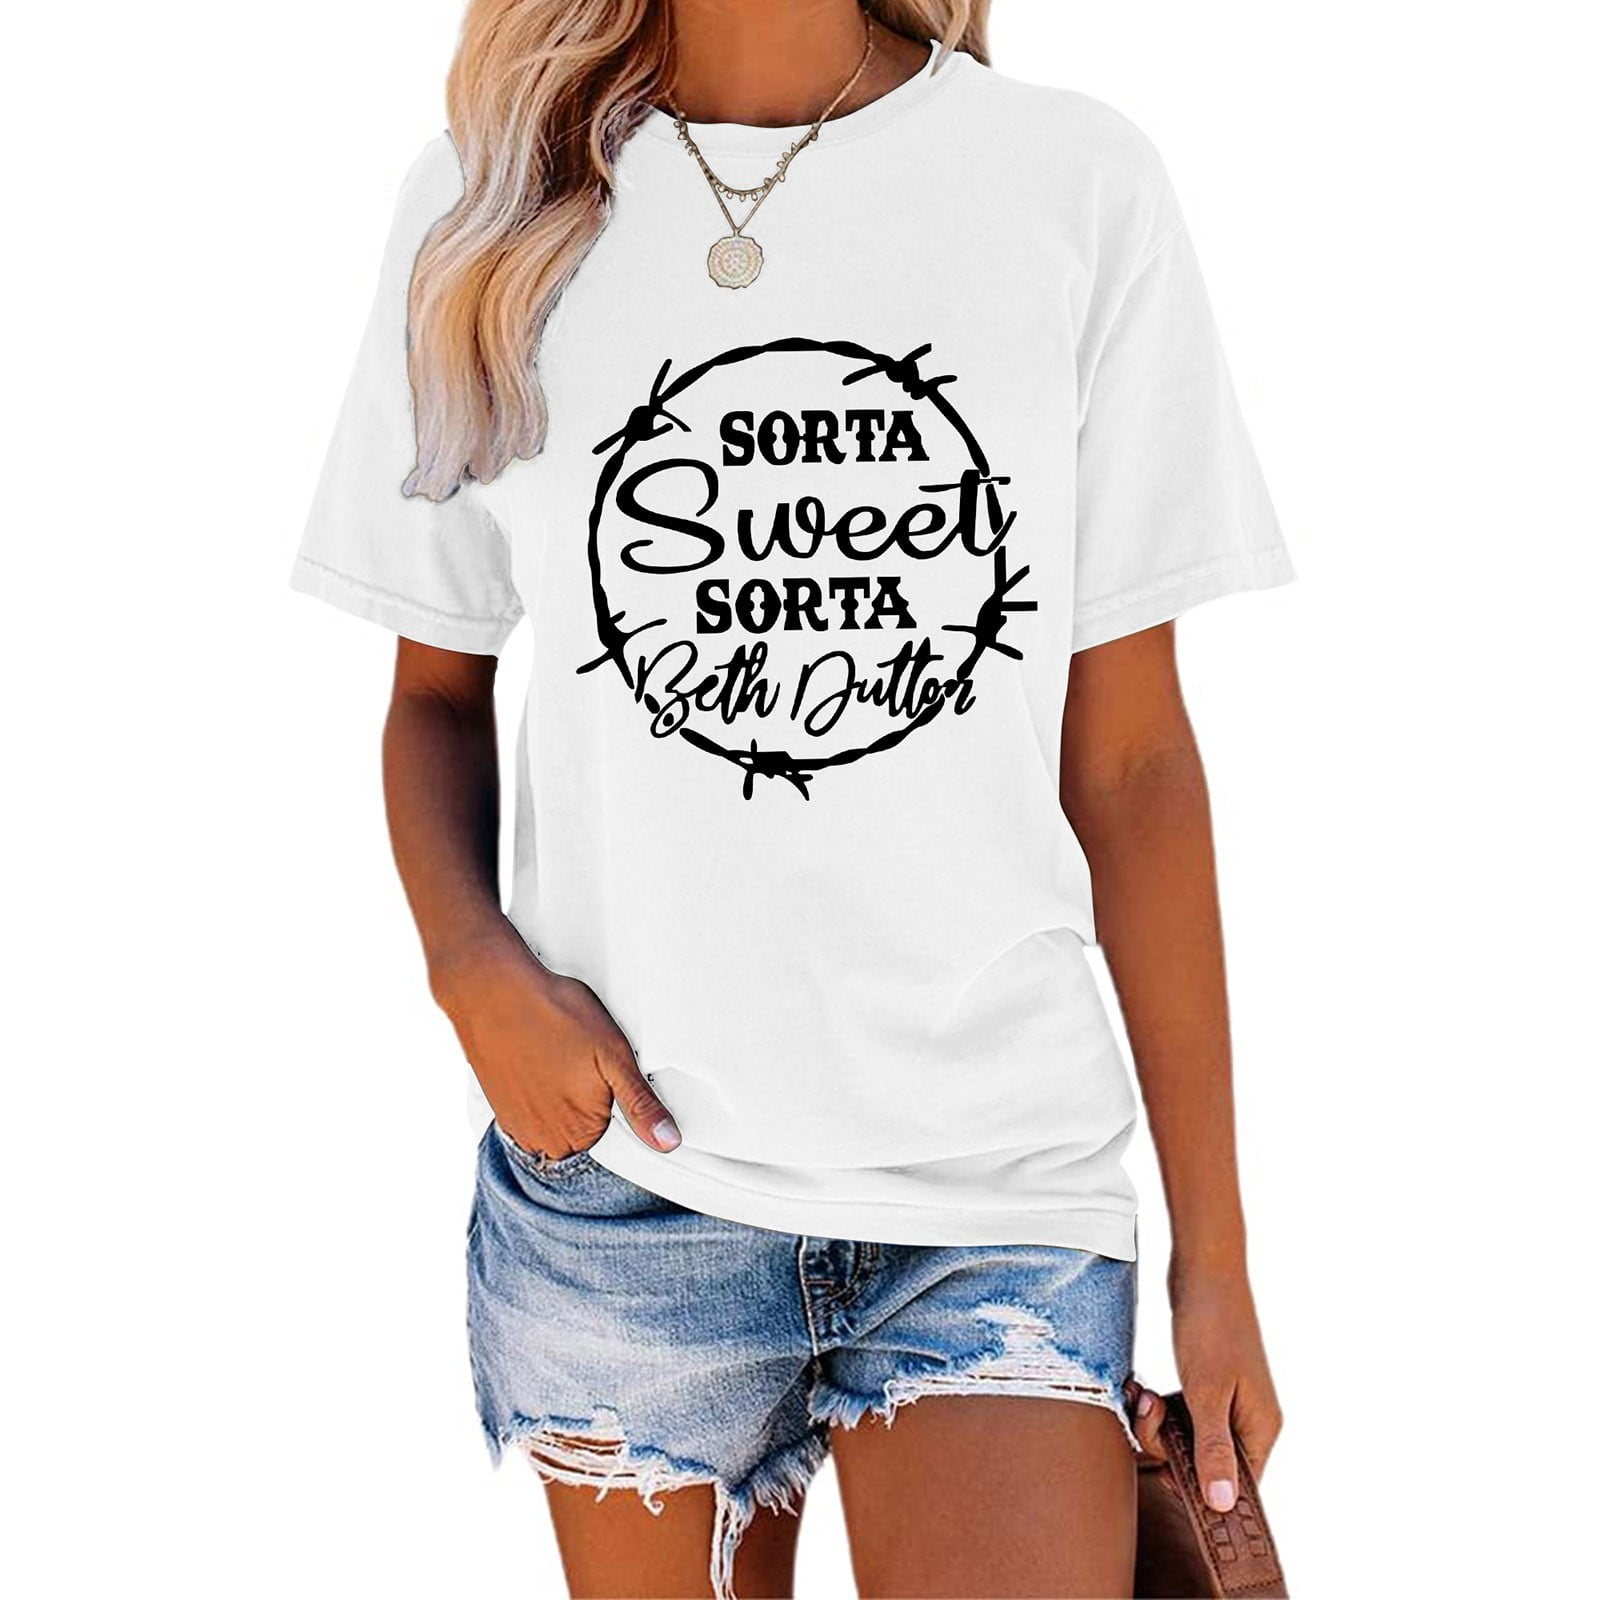 Aayomet Workout Tops For Women Women T-Shirt Round Neck Short Sleeve Top  Casual Funny Cute Teen Girl Tee,White M 